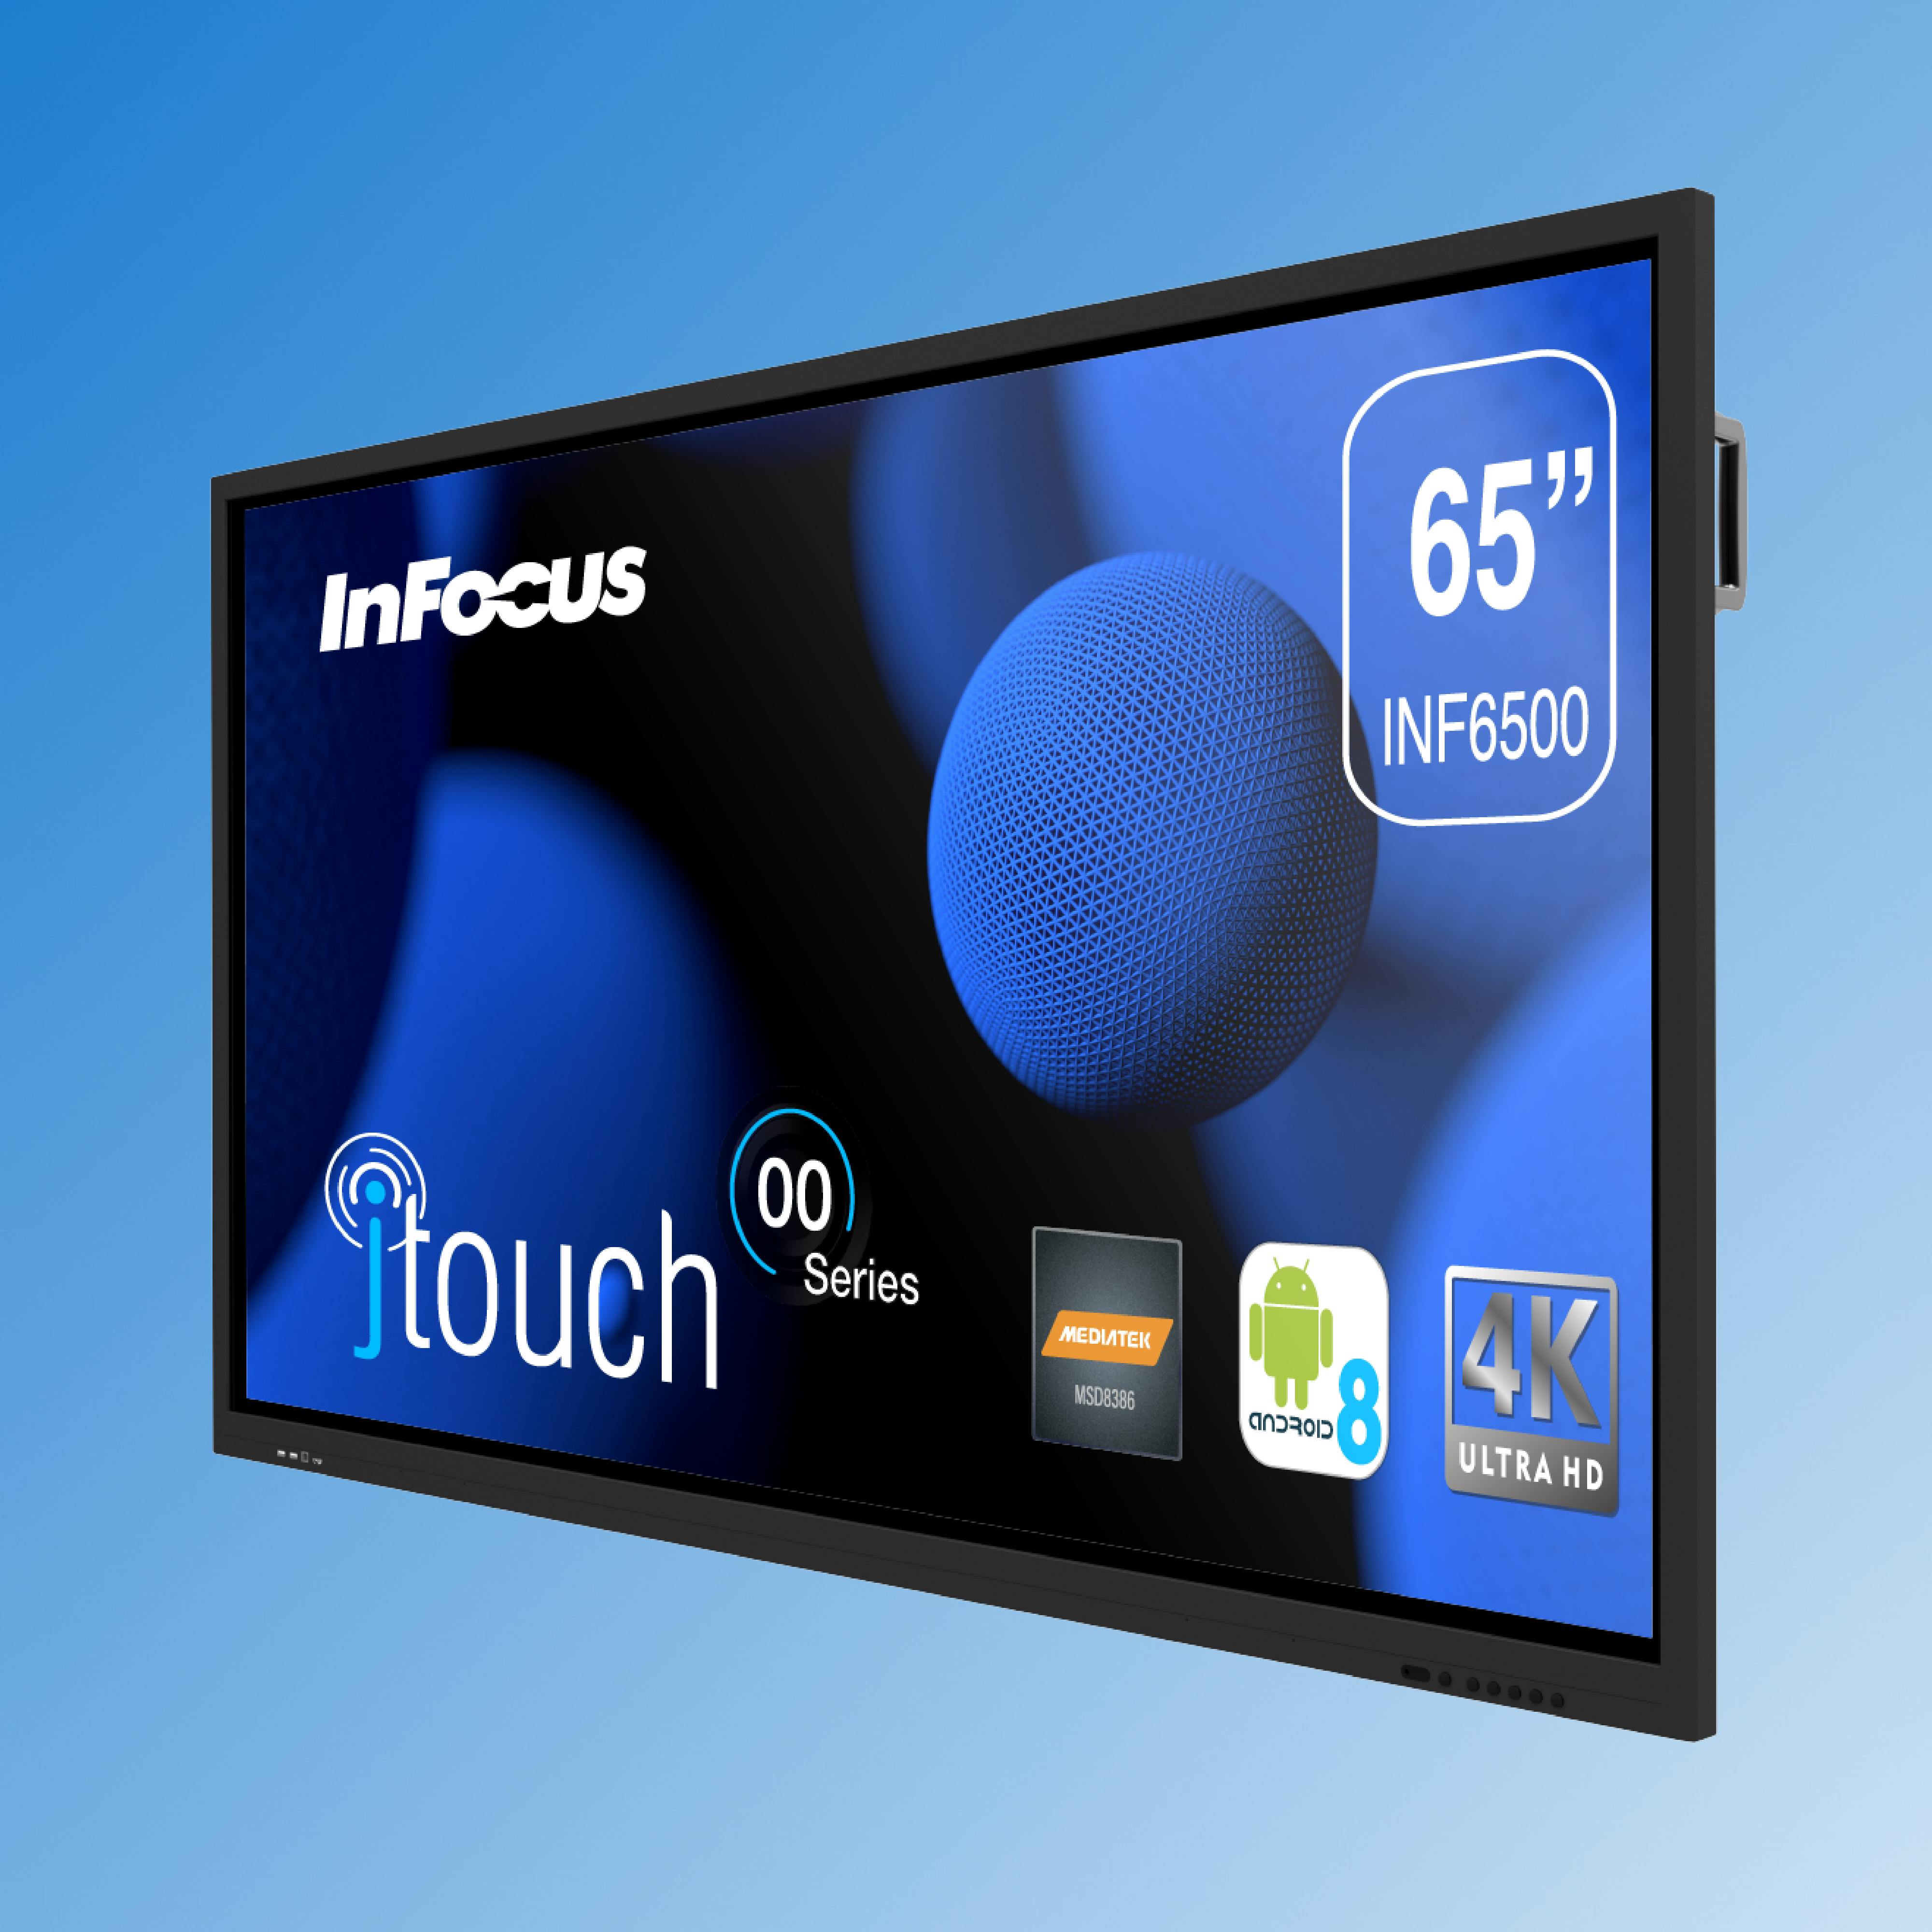 JTouch Series 00 - INF6500